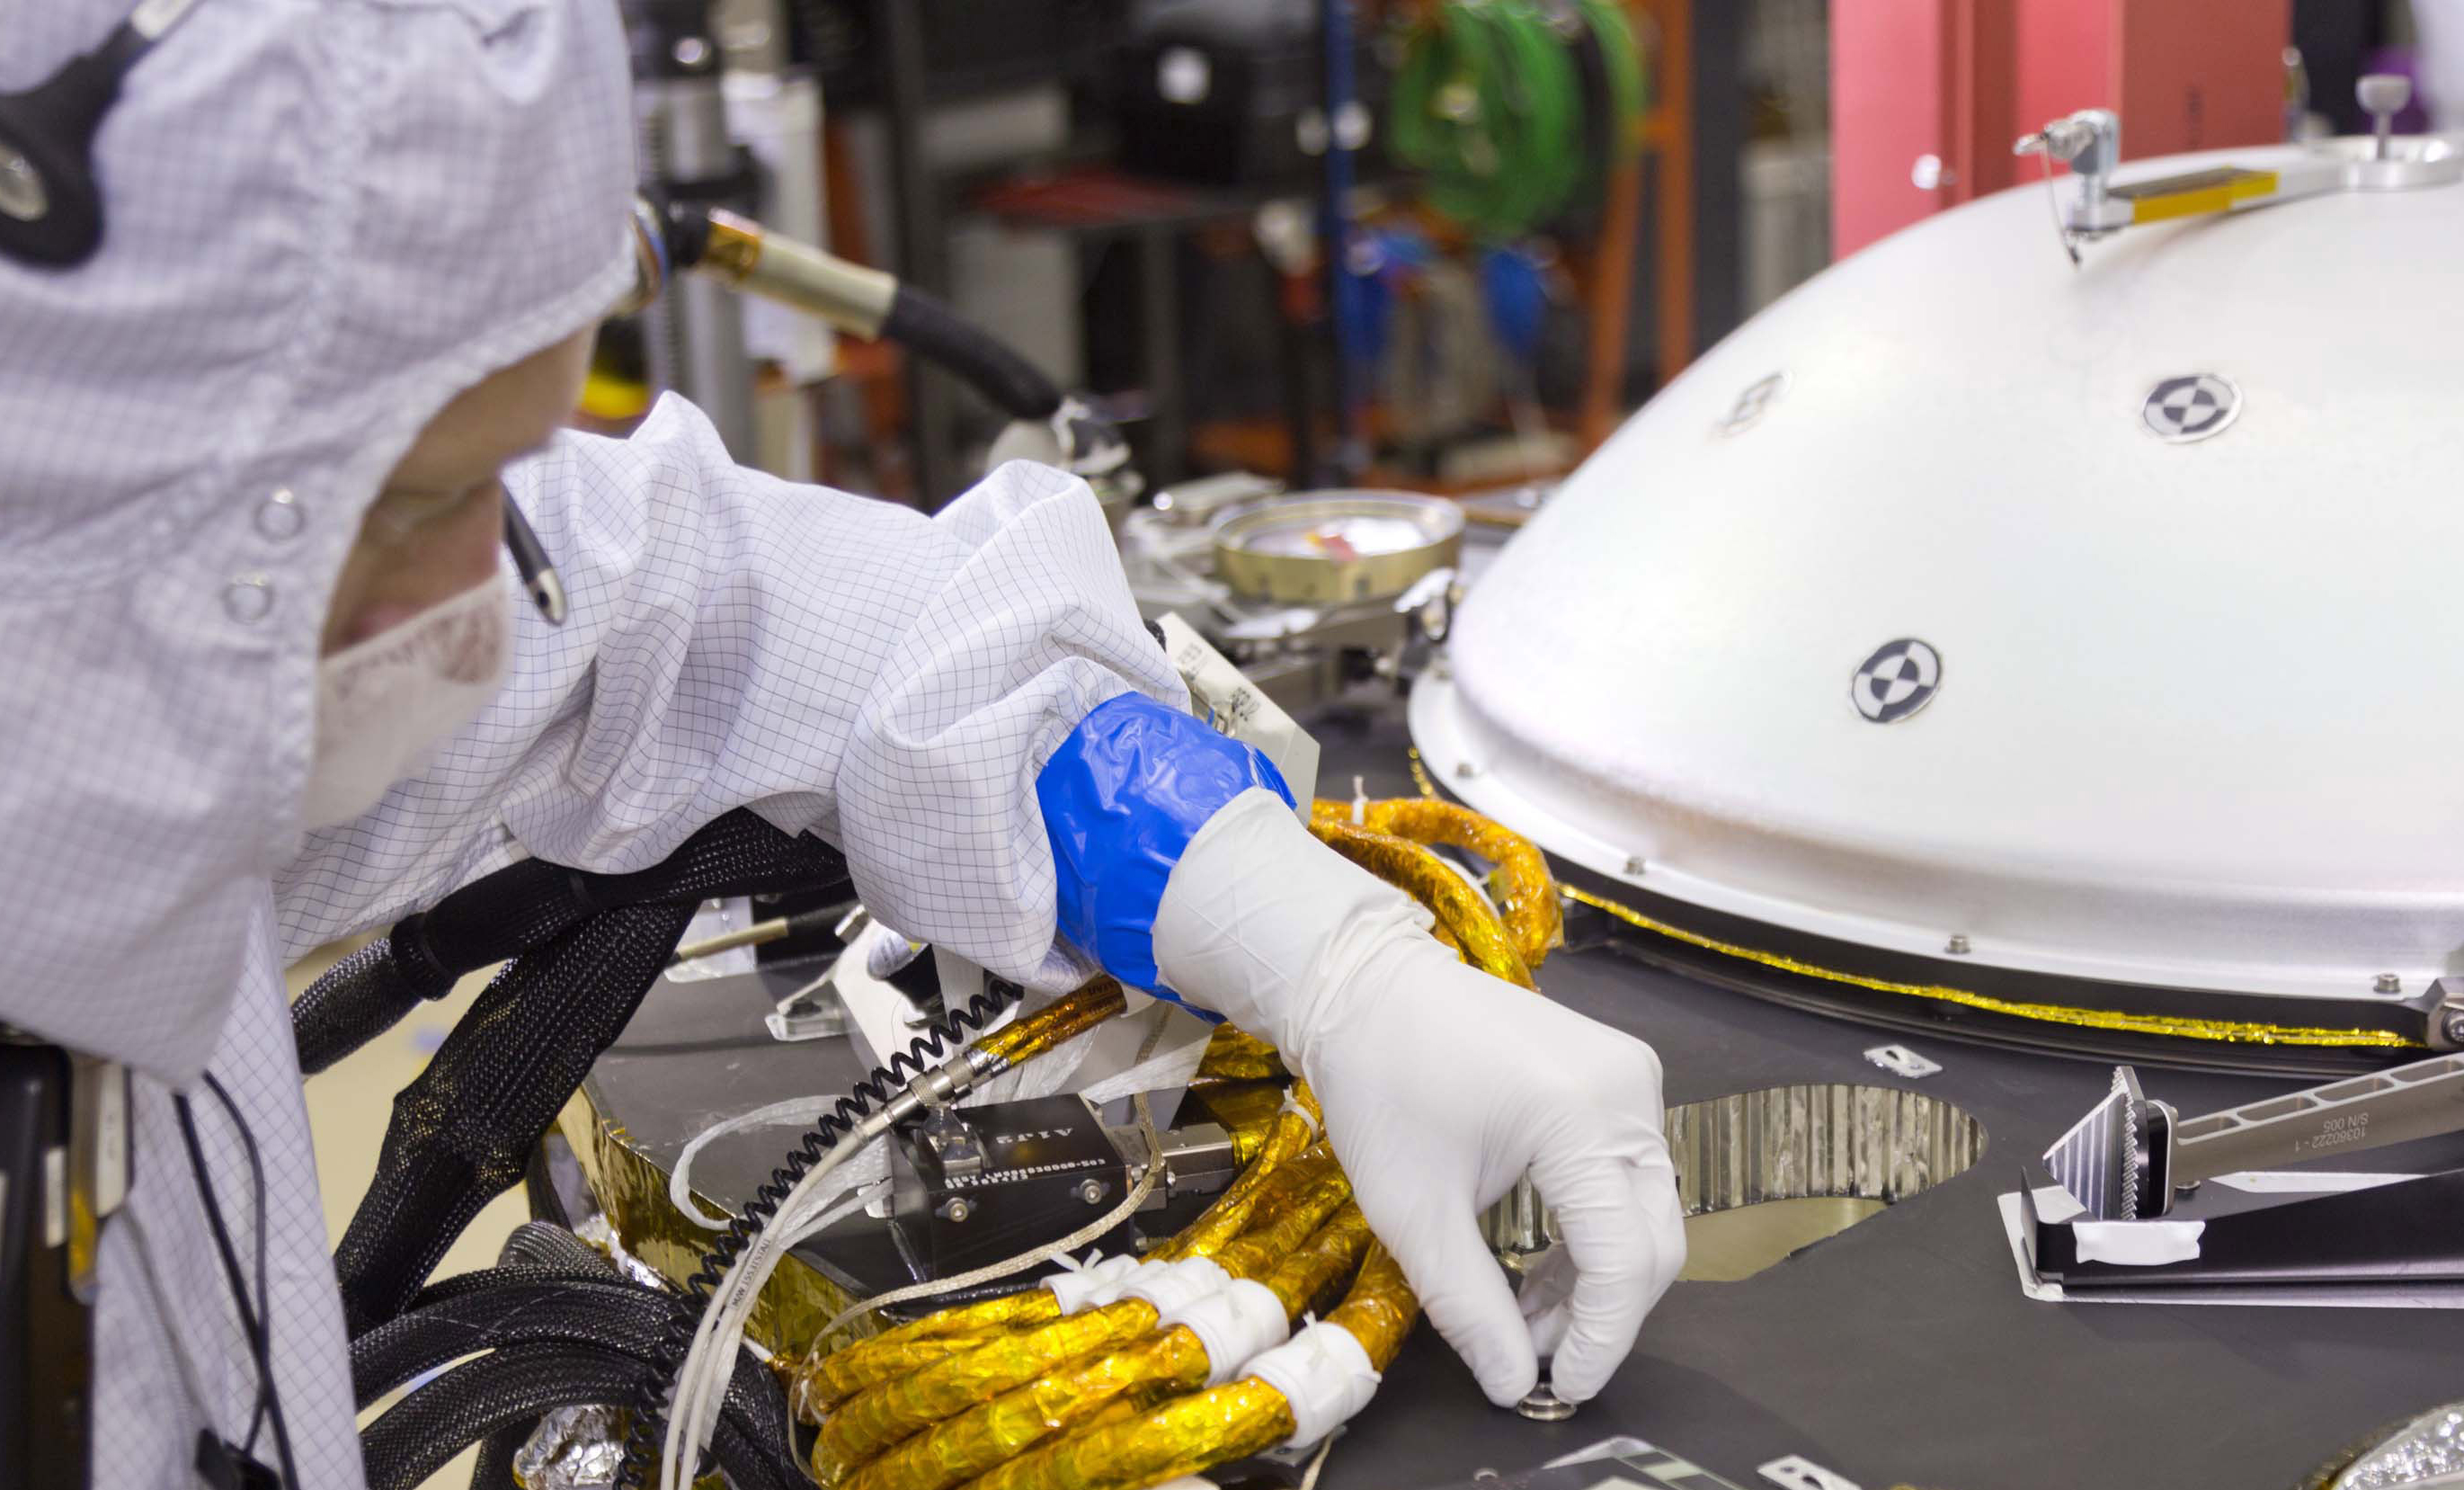 A spacecraft specialist in a clean room at Lockheed Martin Space Systems in Denver, where the InSight lander is being built, affixes a dime-size chip onto the lander deck in November 2015. This signature chip carries 826,923 names, submitted by the public online from all over the world. Photo Credit: NASA/JPL-Caltech/Lockheed Martin